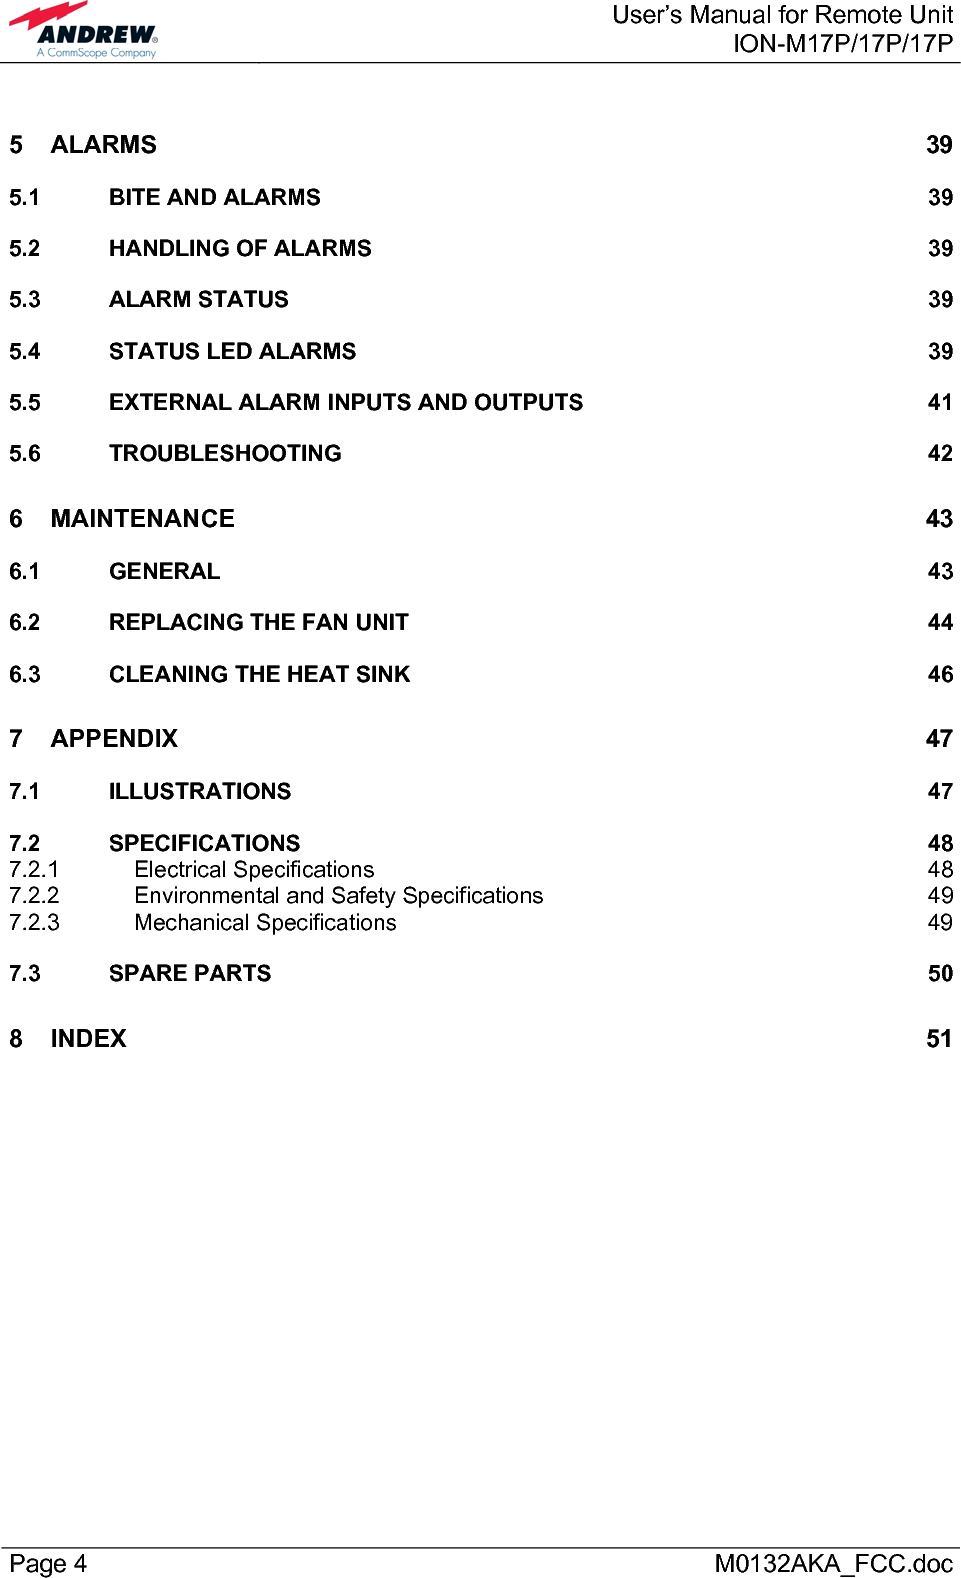  User’s Manual for Remote UnitION-M17P/17P/17P Page 4      M0132AKA_FCC.doc 5 ALARMS 39 5.1 BITE AND ALARMS  39 5.2 HANDLING OF ALARMS  39 5.3 ALARM STATUS  39 5.4 STATUS LED ALARMS  39 5.5 EXTERNAL ALARM INPUTS AND OUTPUTS  41 5.6 TROUBLESHOOTING 42 6 MAINTENANCE 43 6.1 GENERAL 43 6.2 REPLACING THE FAN UNIT  44 6.3 CLEANING THE HEAT SINK  46 7 APPENDIX 47 7.1 ILLUSTRATIONS 47 7.2 SPECIFICATIONS 48 7.2.1 Electrical Specifications  48 7.2.2 Environmental and Safety Specifications  49 7.2.3 Mechanical Specifications  49 7.3 SPARE PARTS  50 8 INDEX 51  